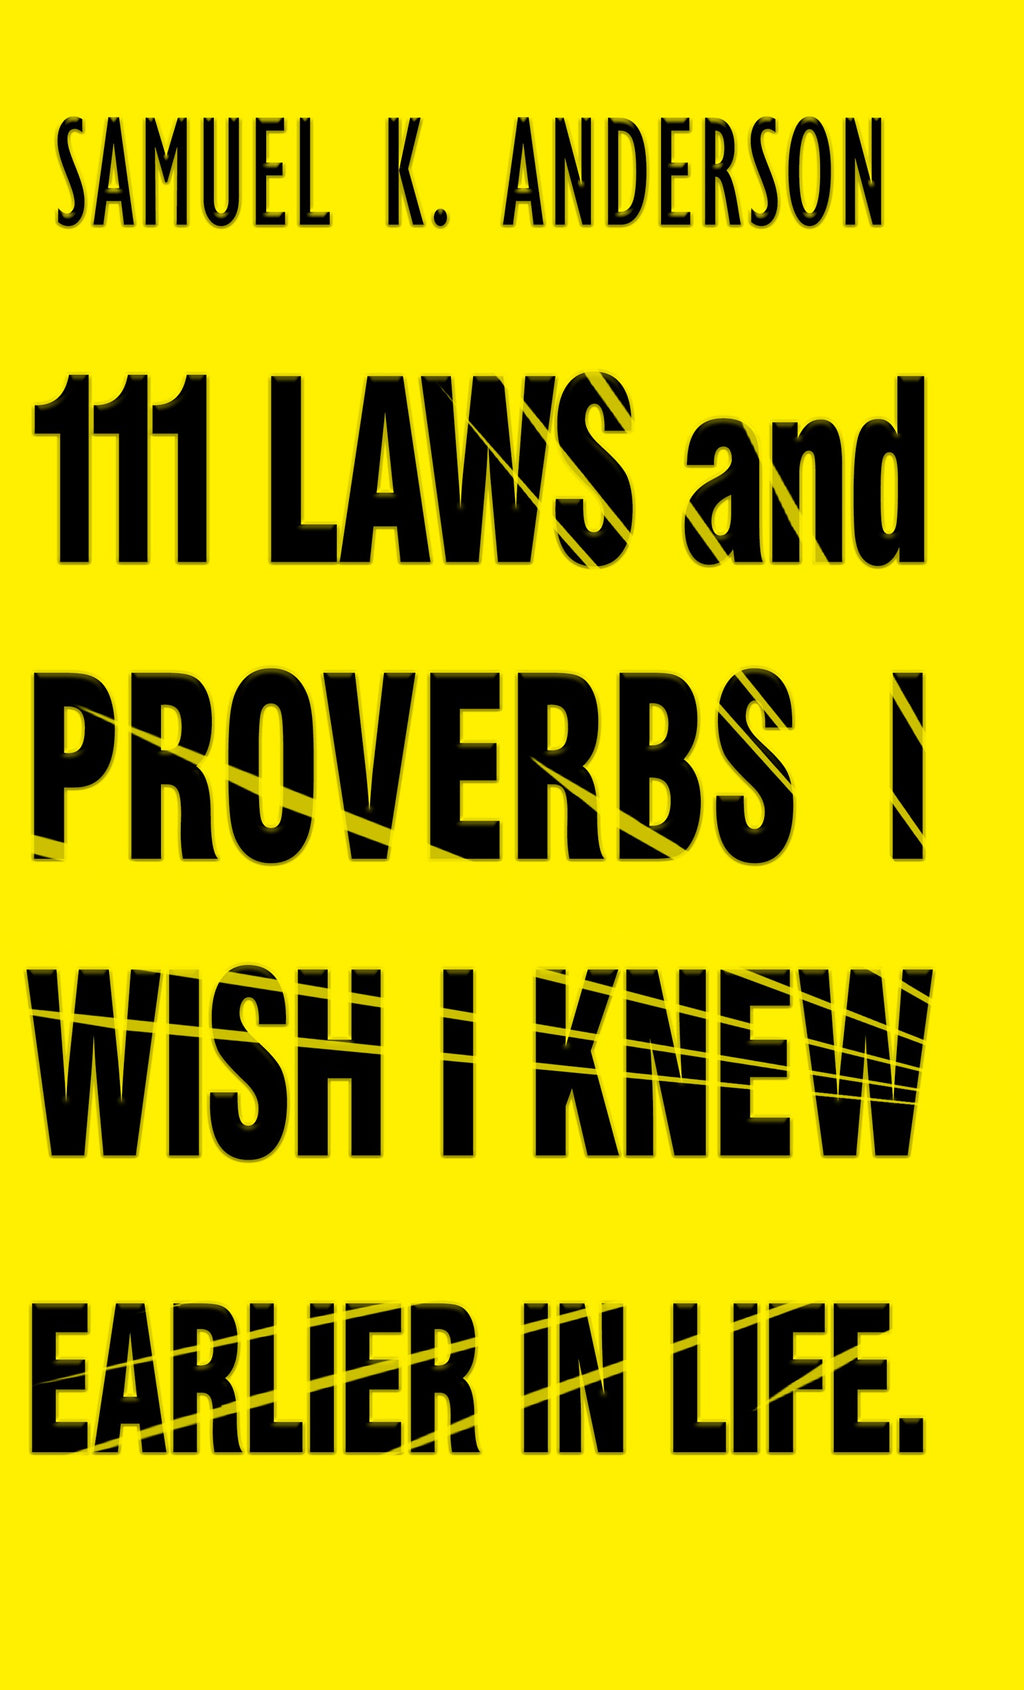 111 LAWS and PROVERBS I WISH I KNEW EARLIER IN LIFE (Paperback)